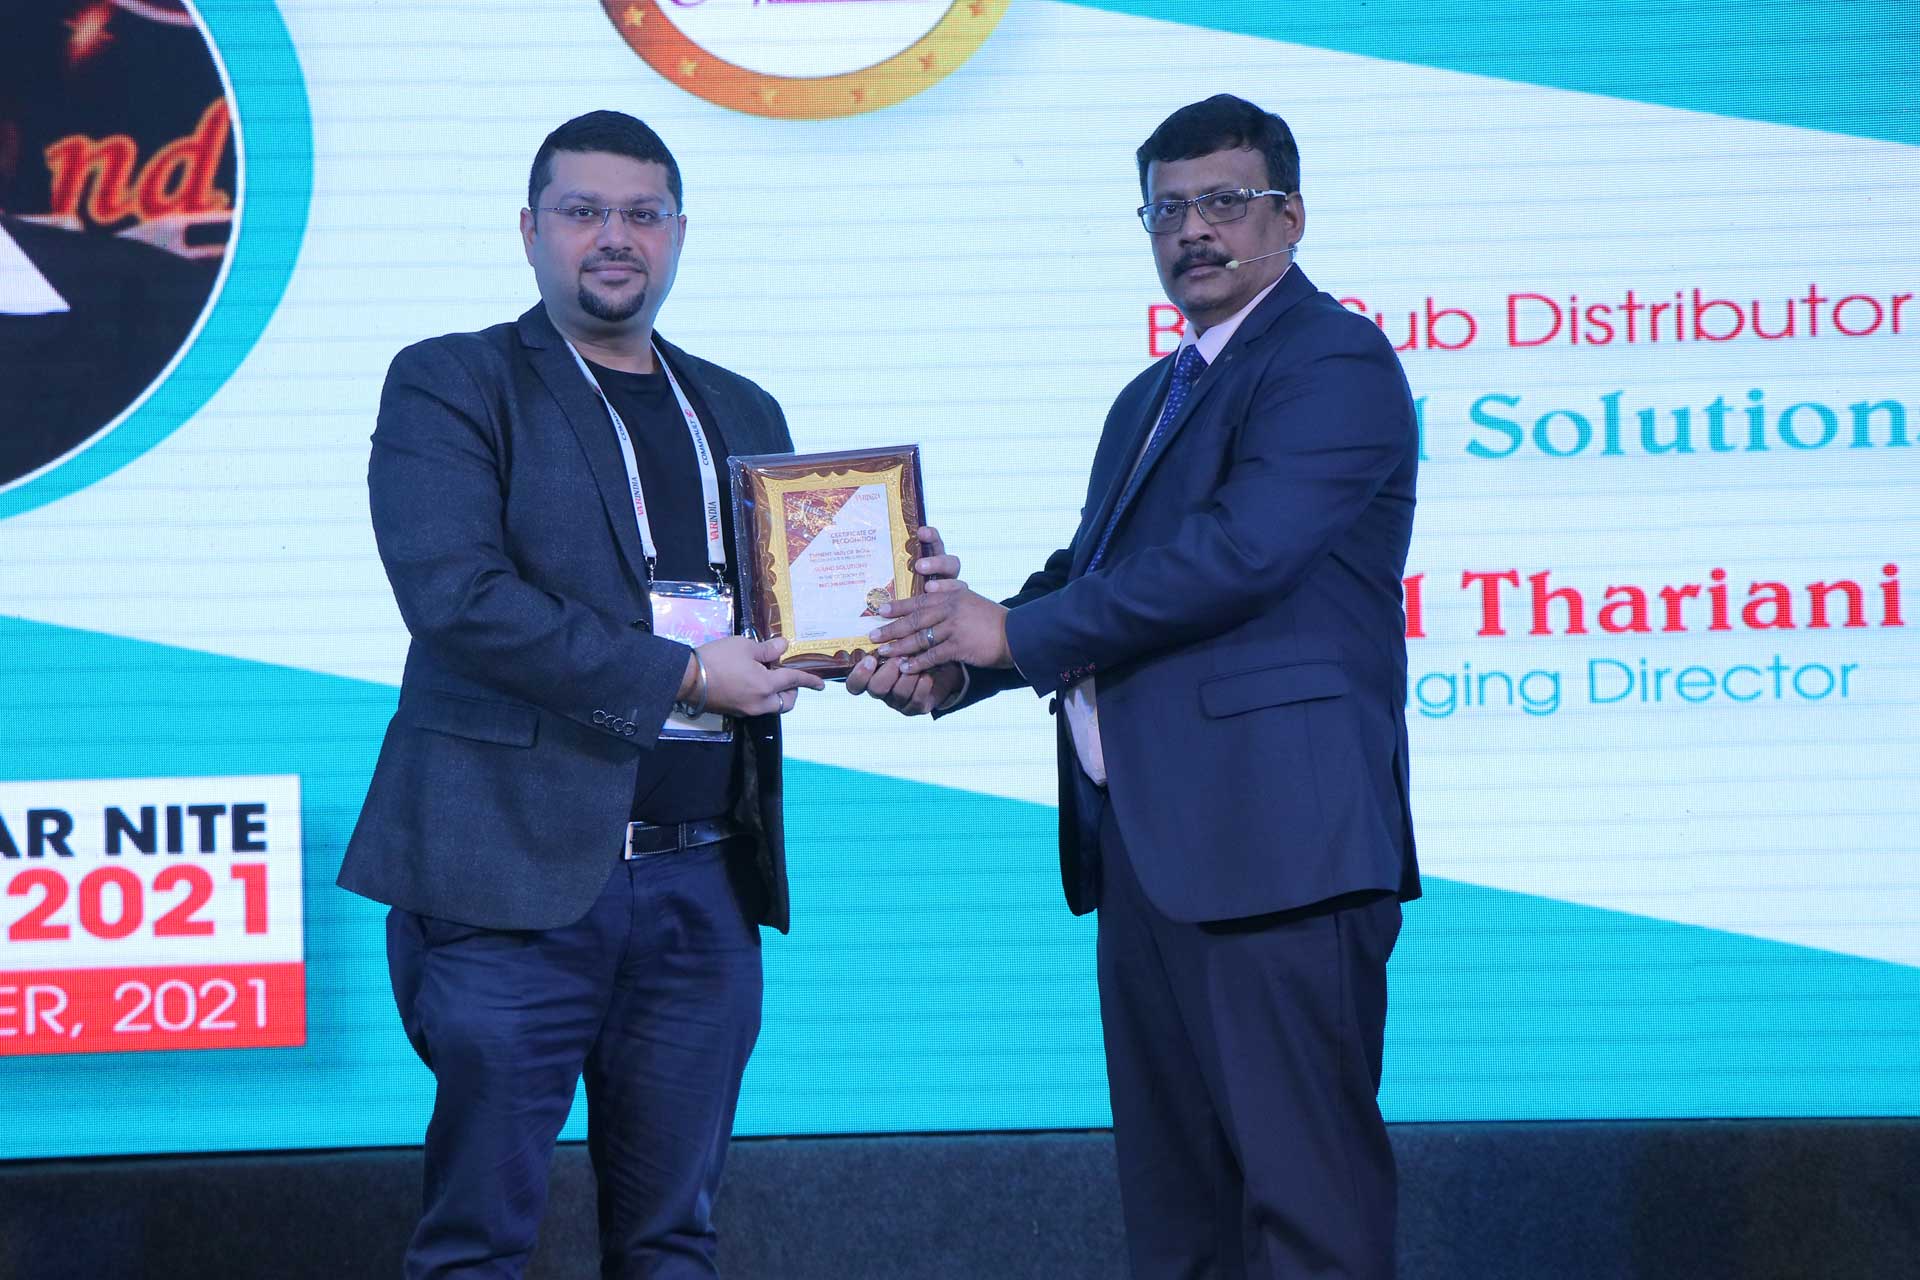 Best Sub-Distributor Award goes to Sound Solutions at 20th Star Nite Awards 2021